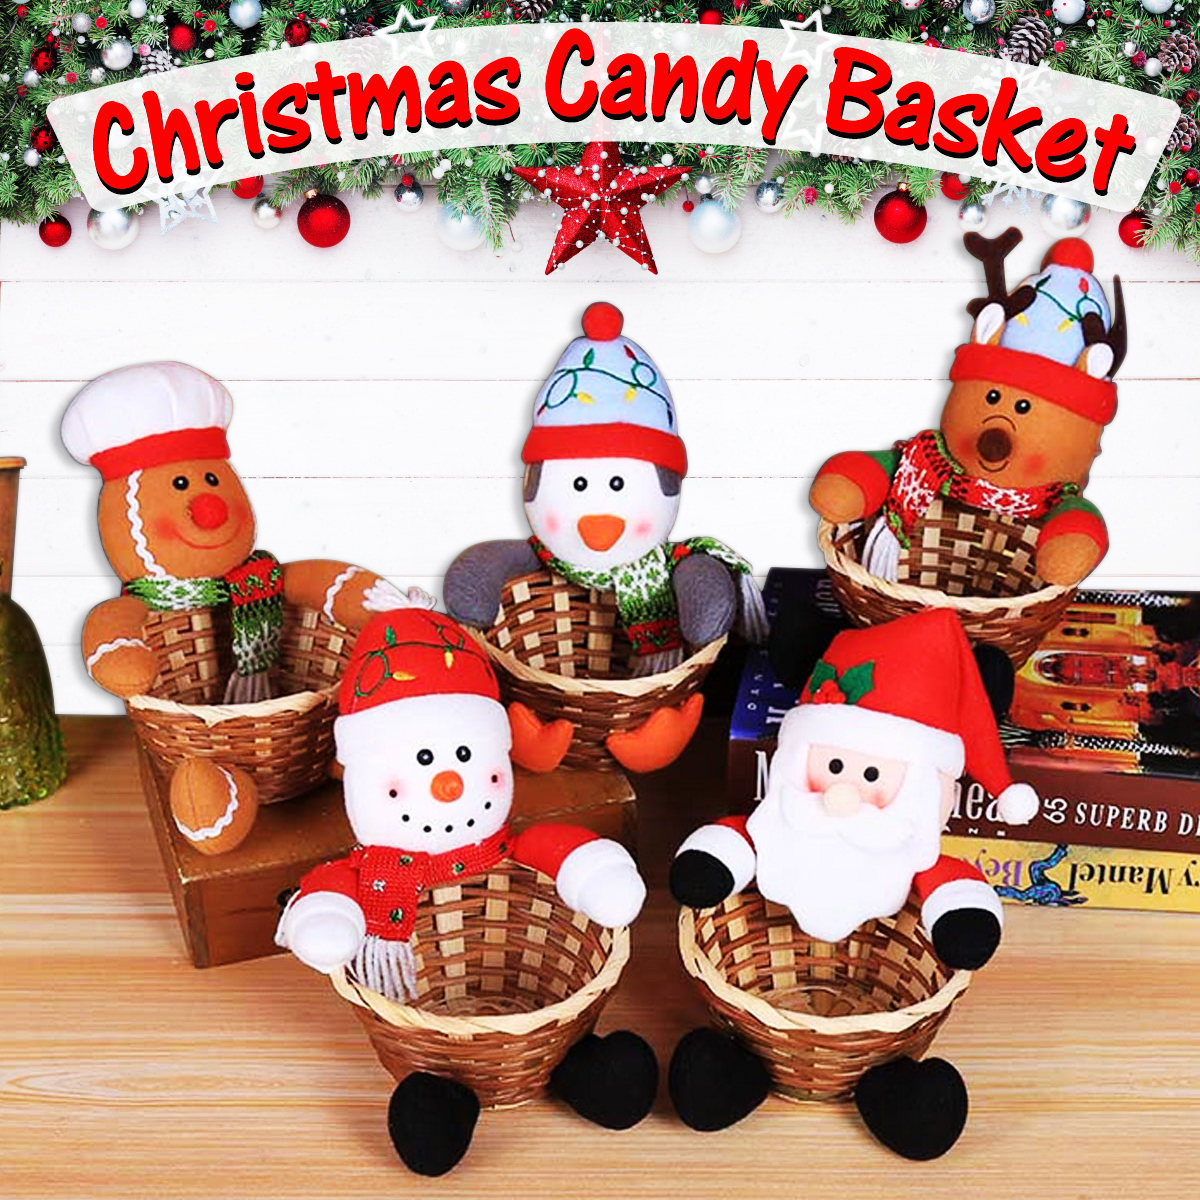 5-Types-Christmas-Candy-Storage-Basket-Santa-Claus-Home-Decorations-Ornaments-1477556-1